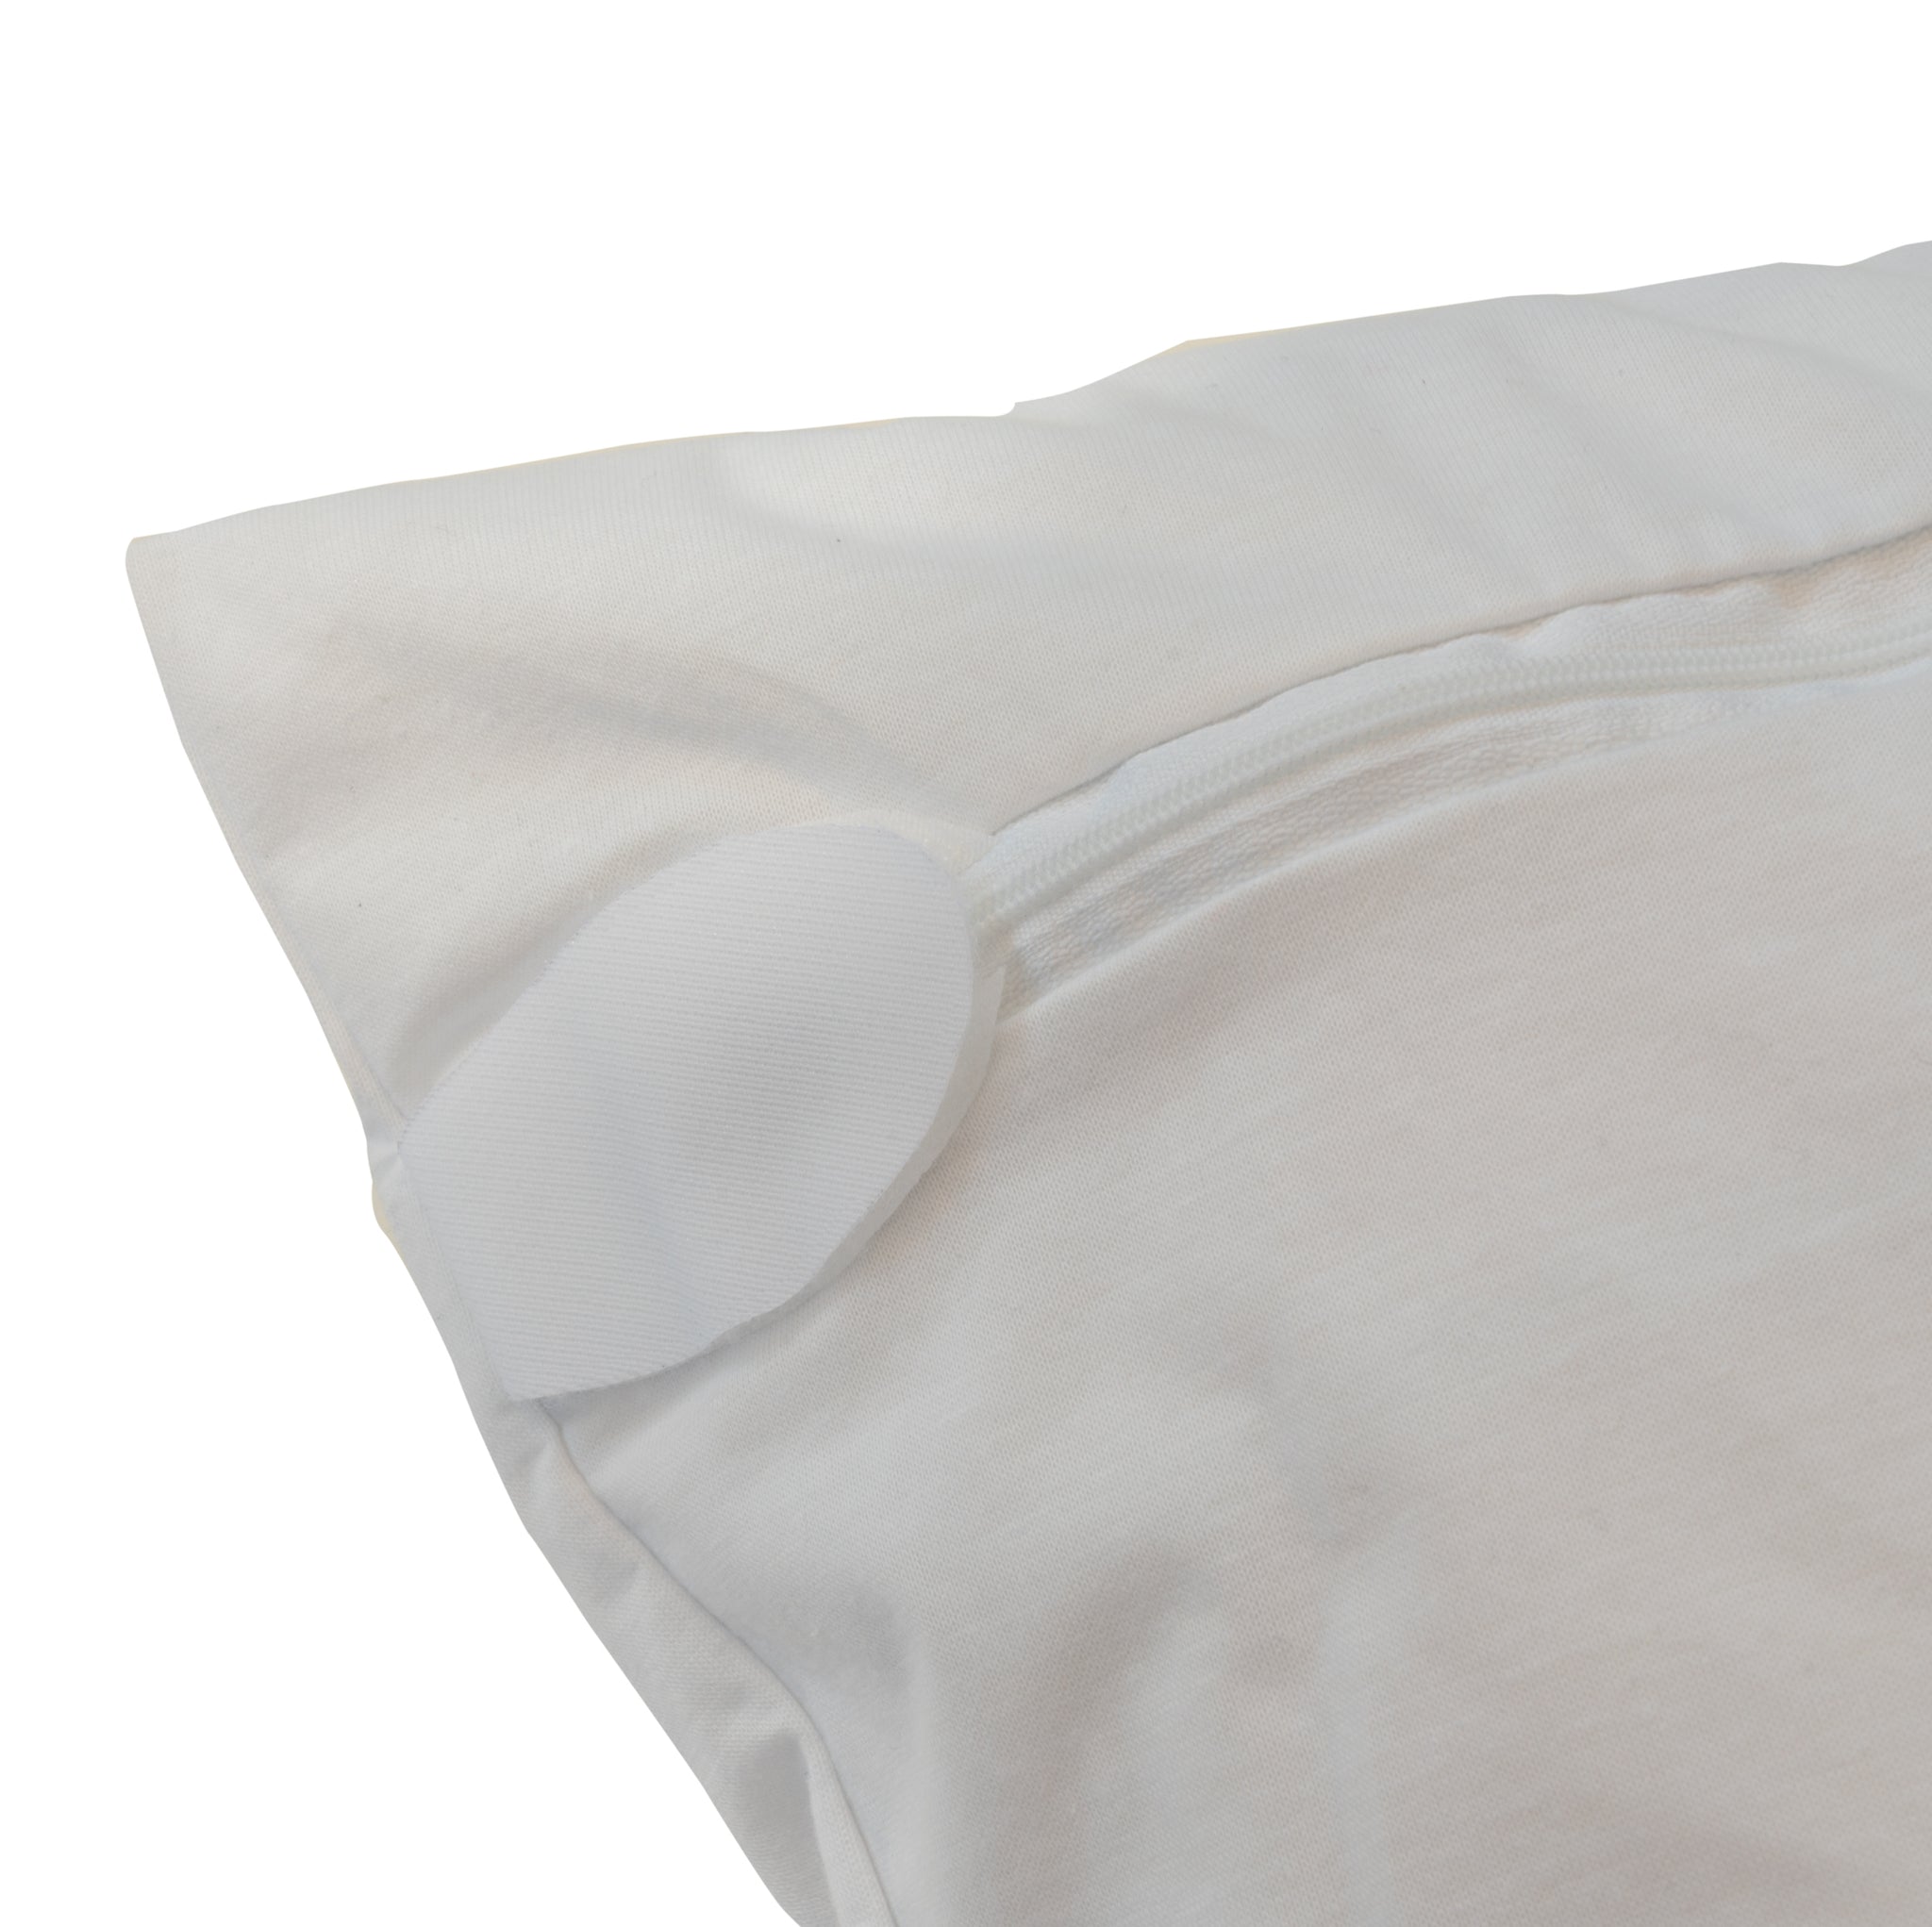 Bed Bug Safe, Waterproof Pillow Protectors - 100% cotton, zippered, locked, lab tested